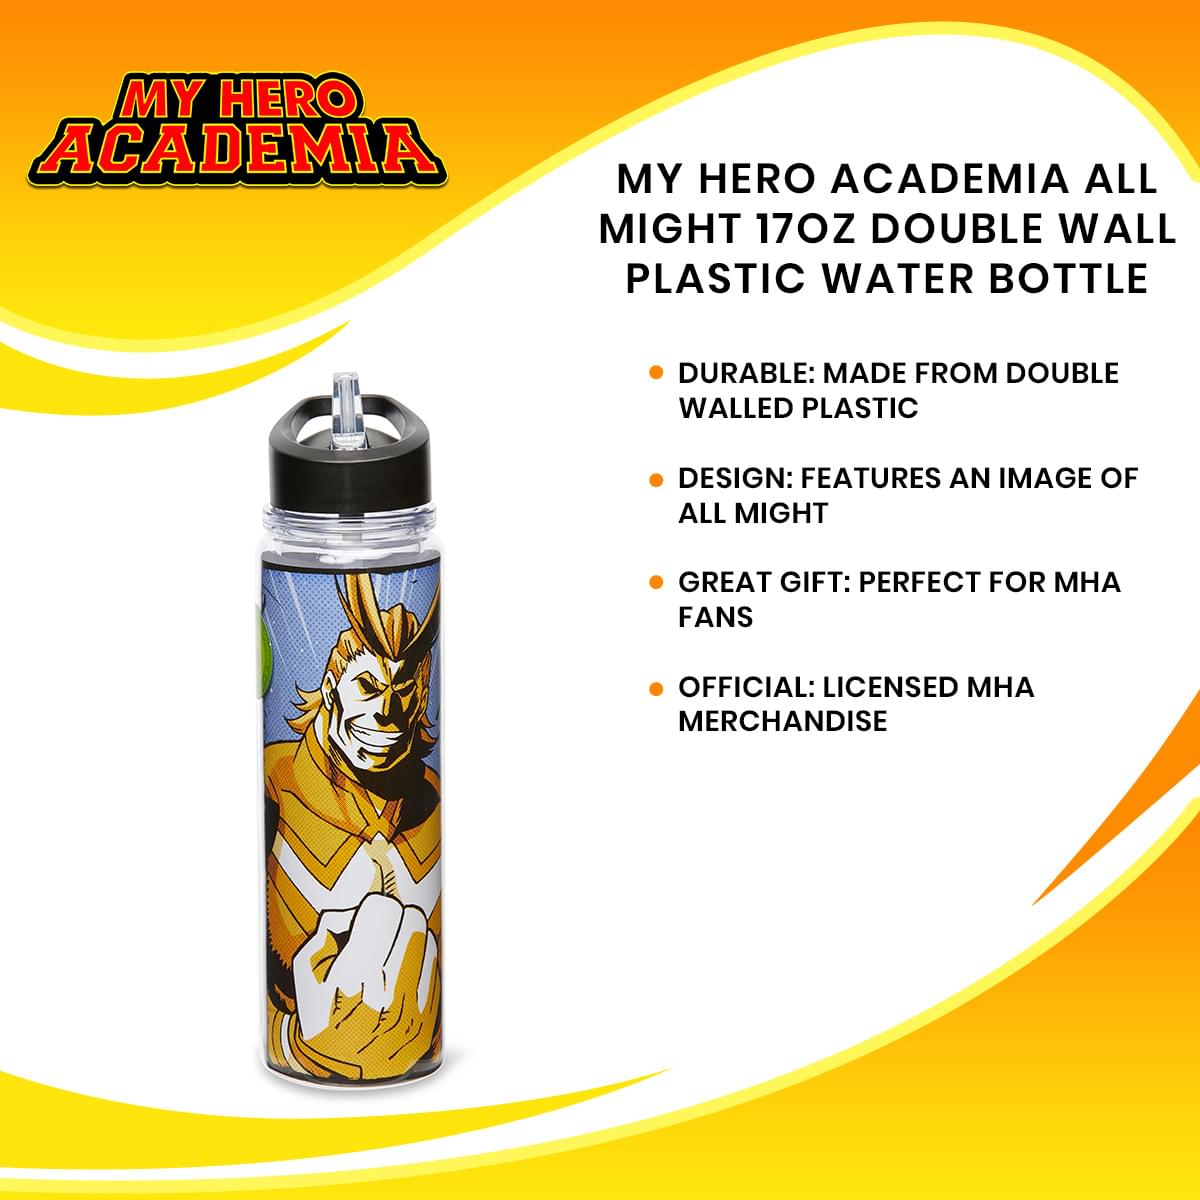 My Hero Academia All Might 17oz Double Wall Plastic Water Bottle